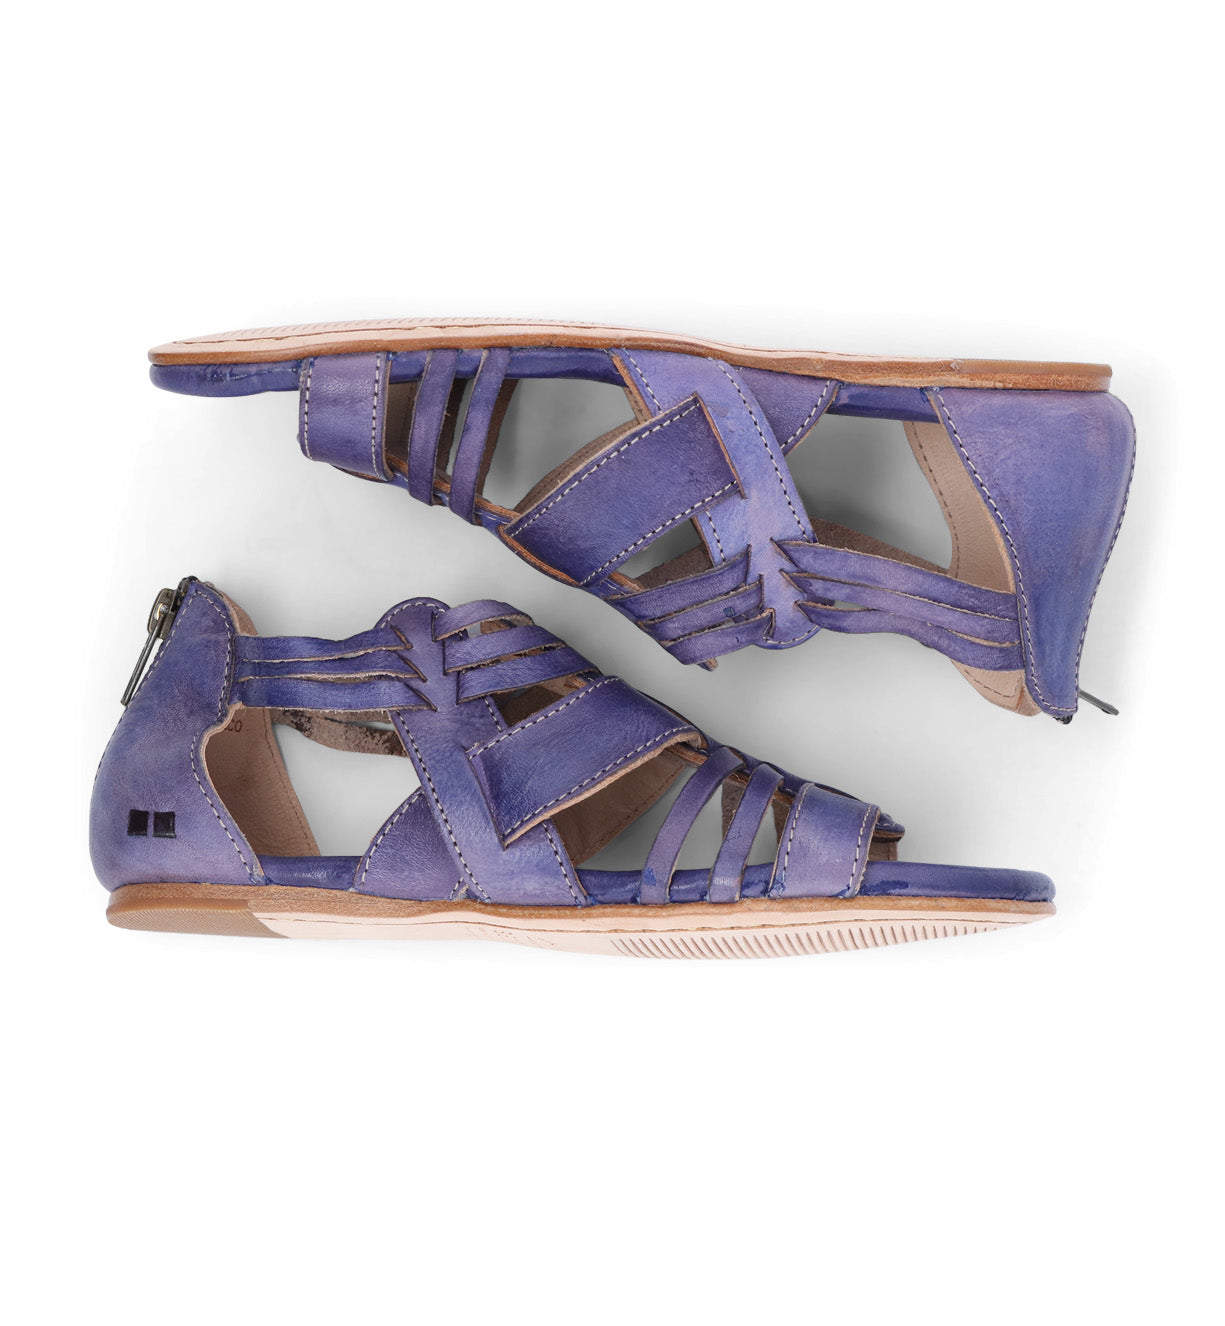 A pair of blue Bed Stu Cara sandals with straps and buckles.